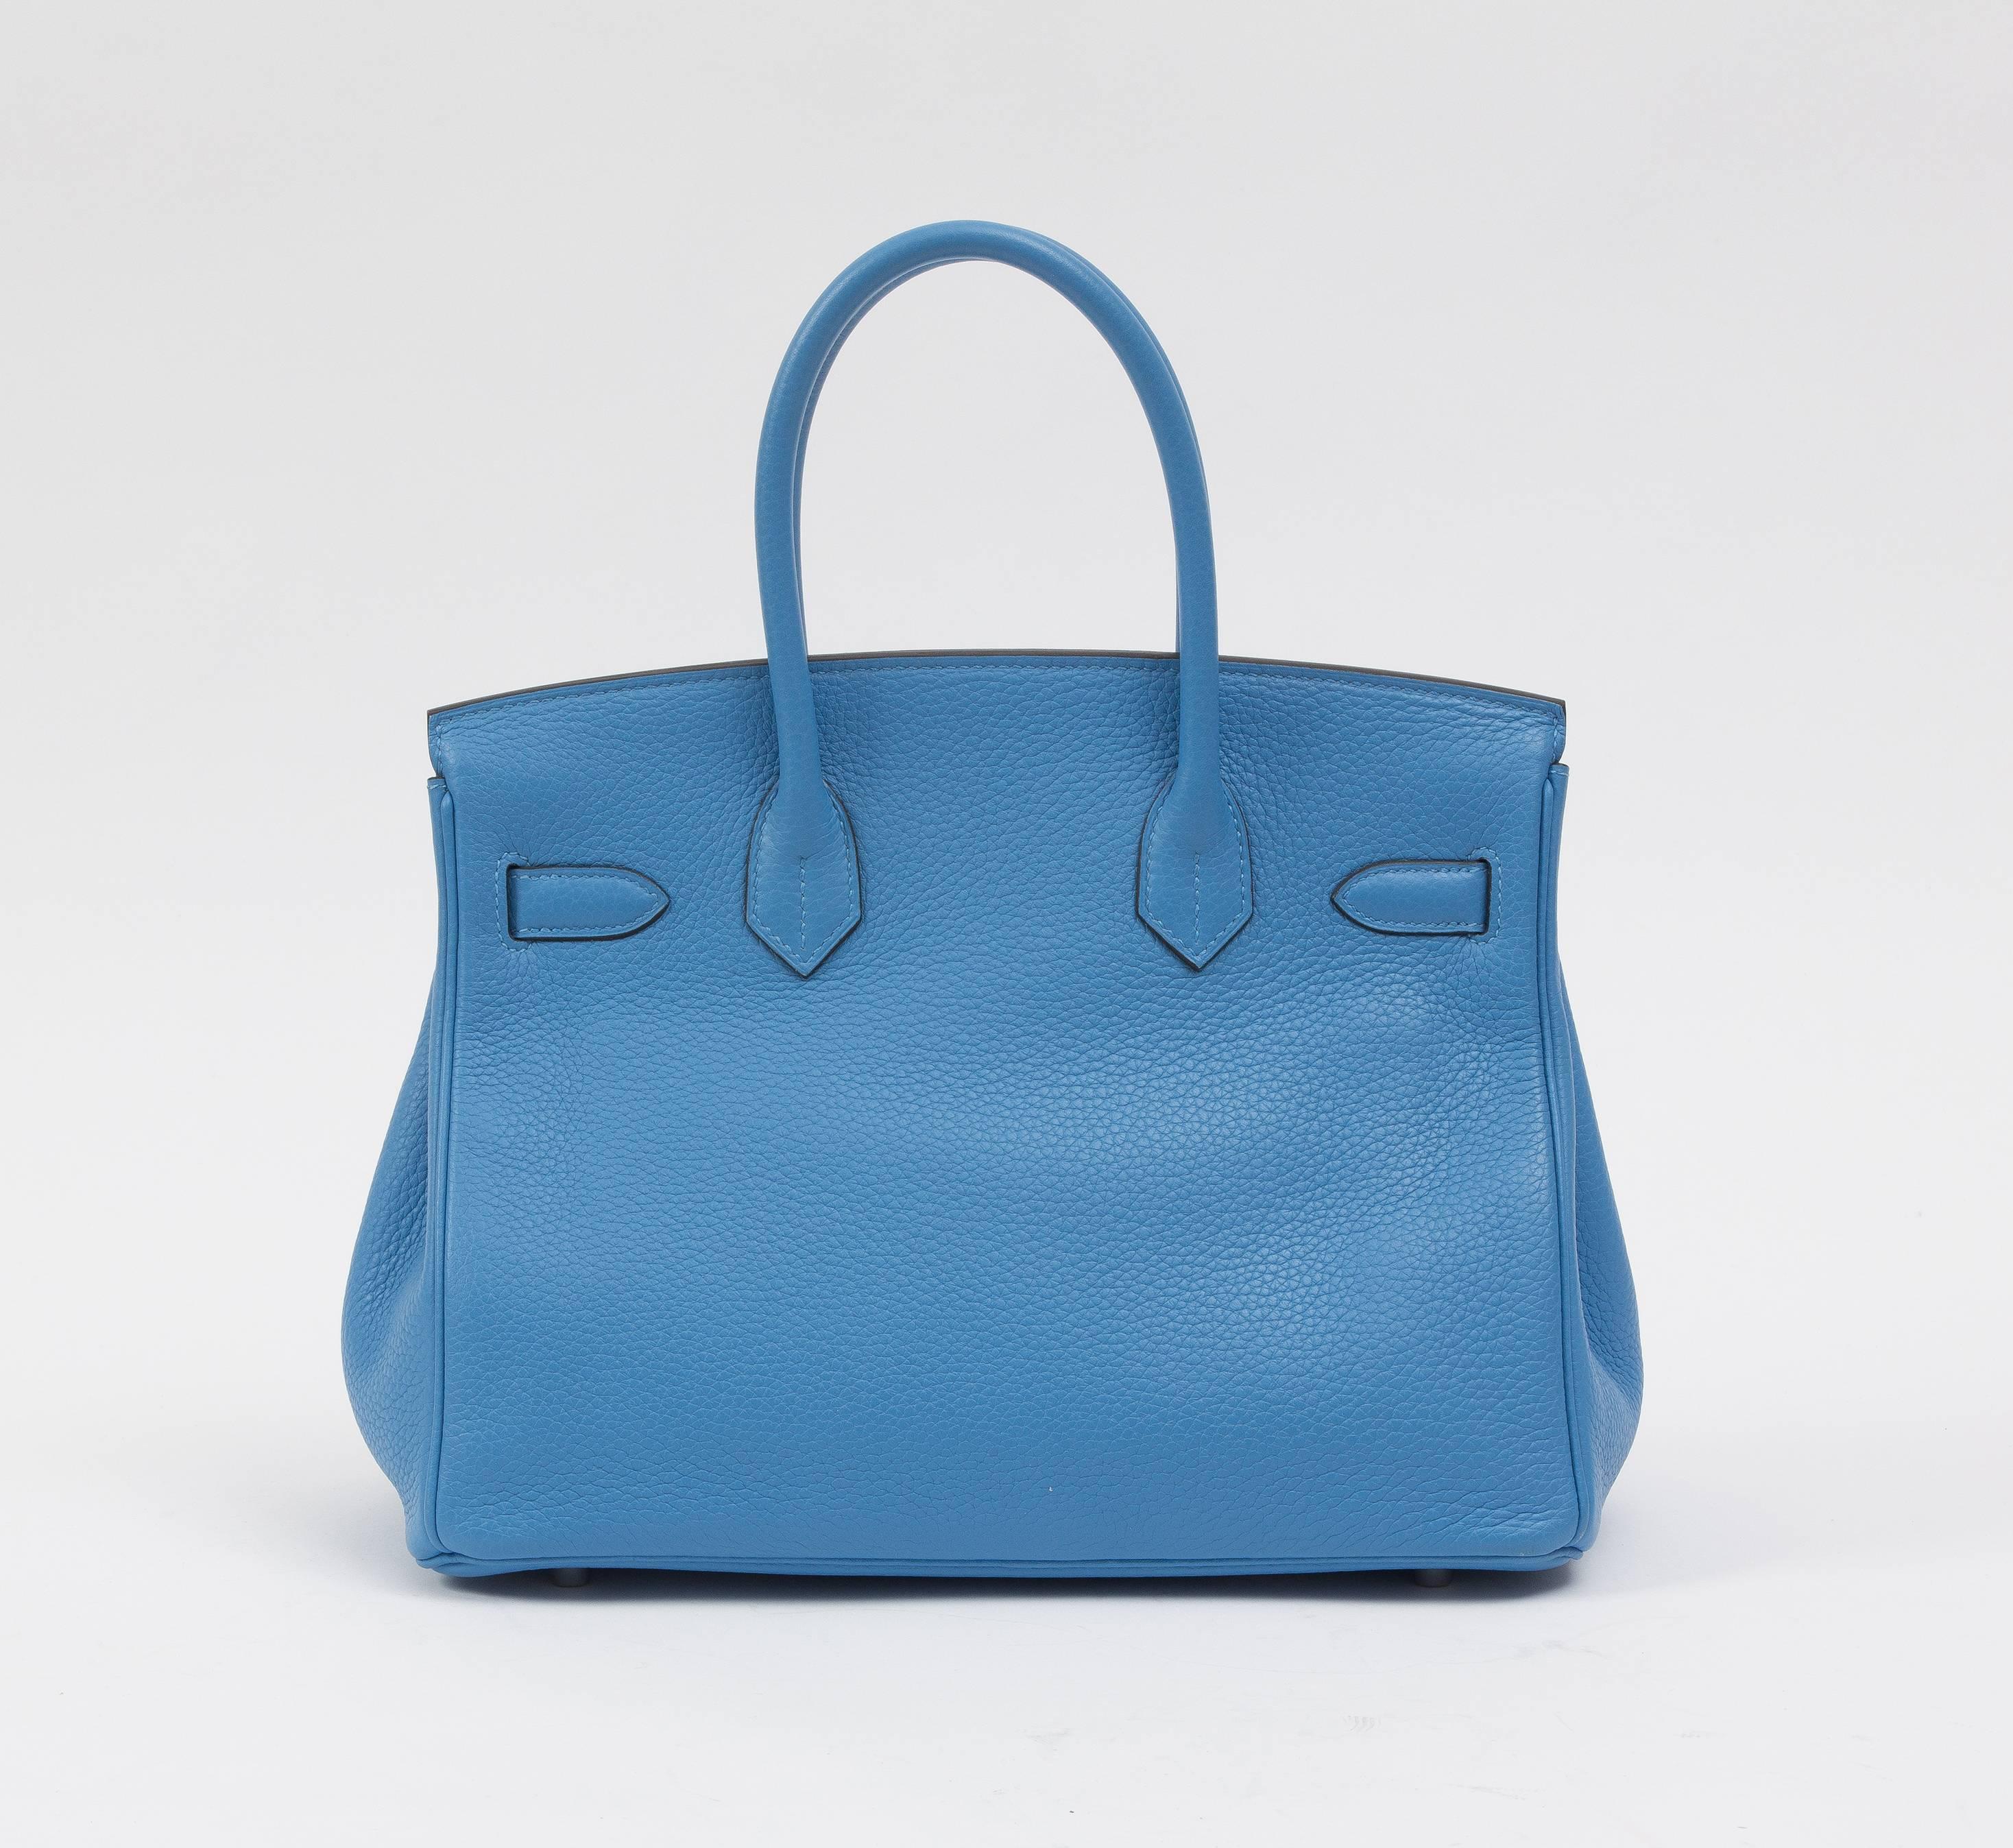 Hermes Birkin 30cm in blue paradise  In Excellent Condition For Sale In New York, NY